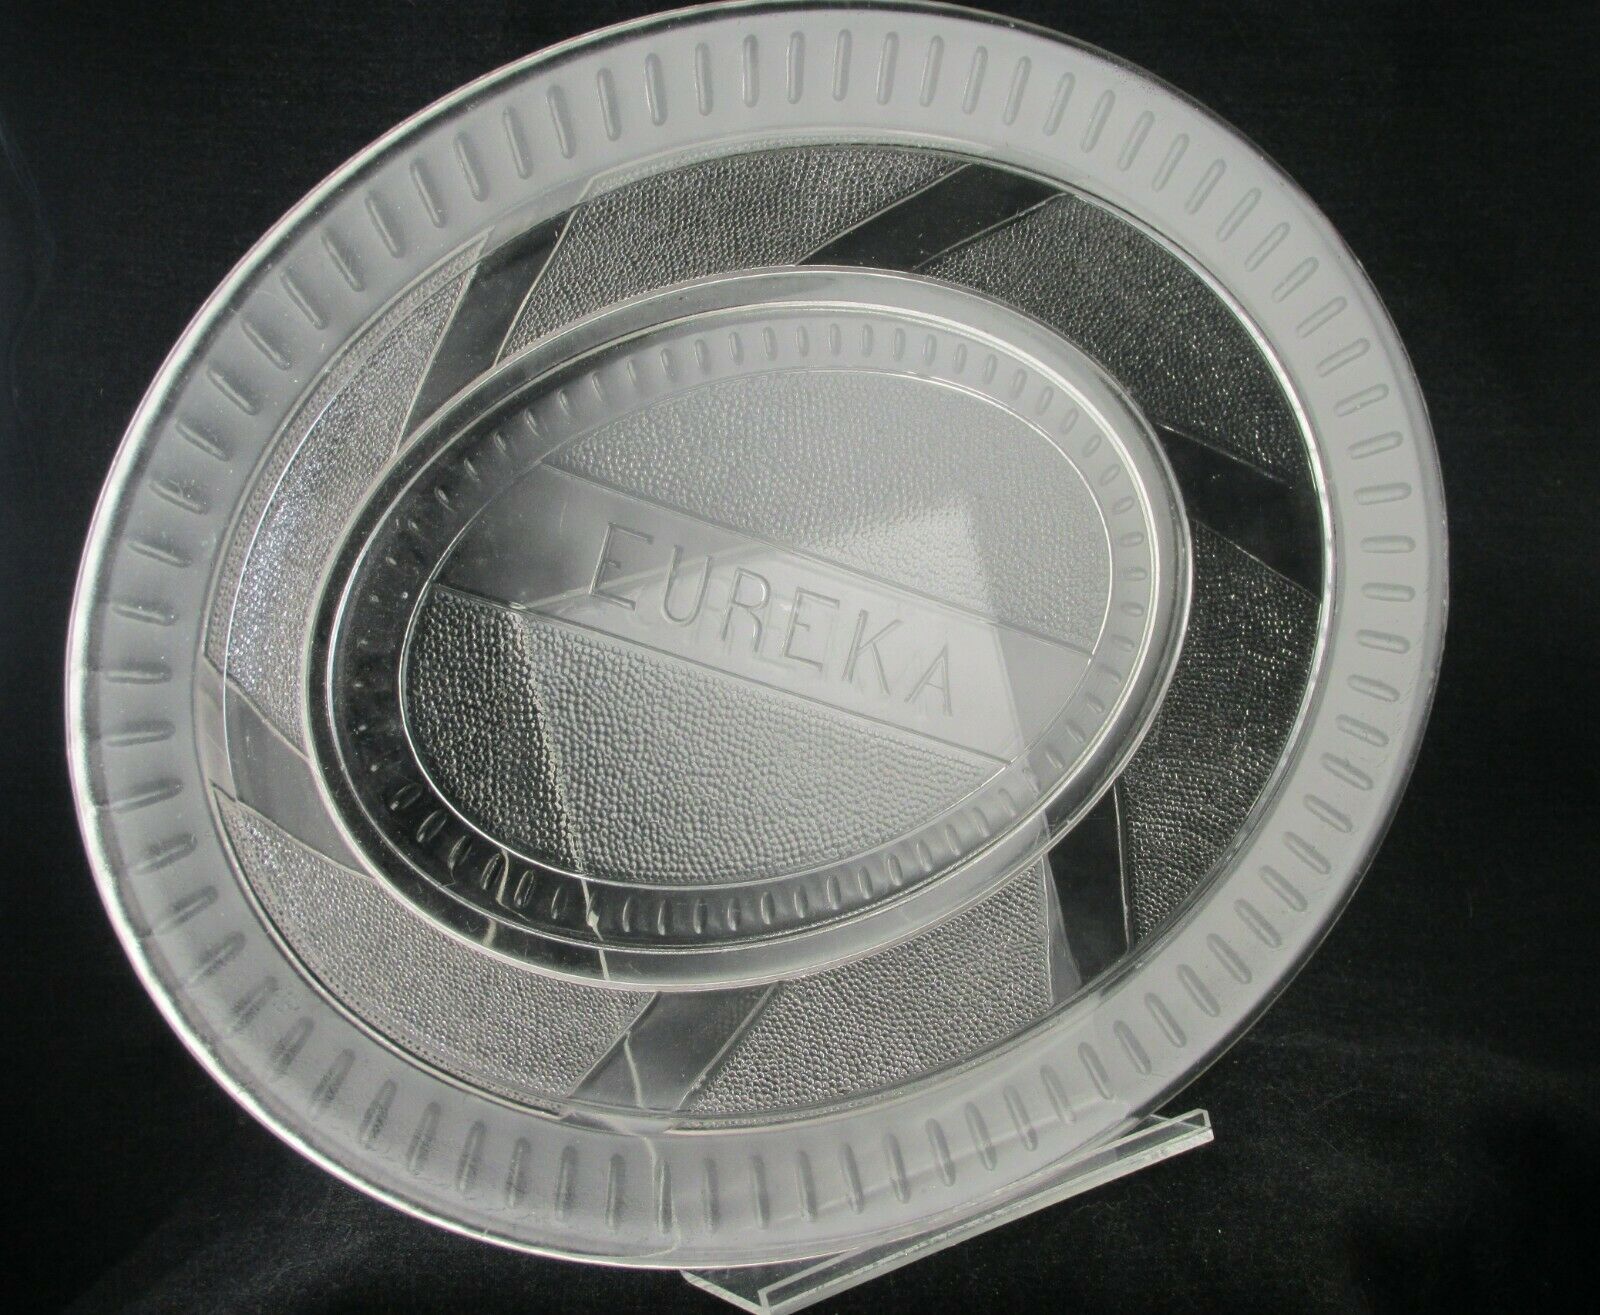 1870s Eureka Eapg Bread Platter Clear Pressed Glass Ripley 11.5 Inches Long